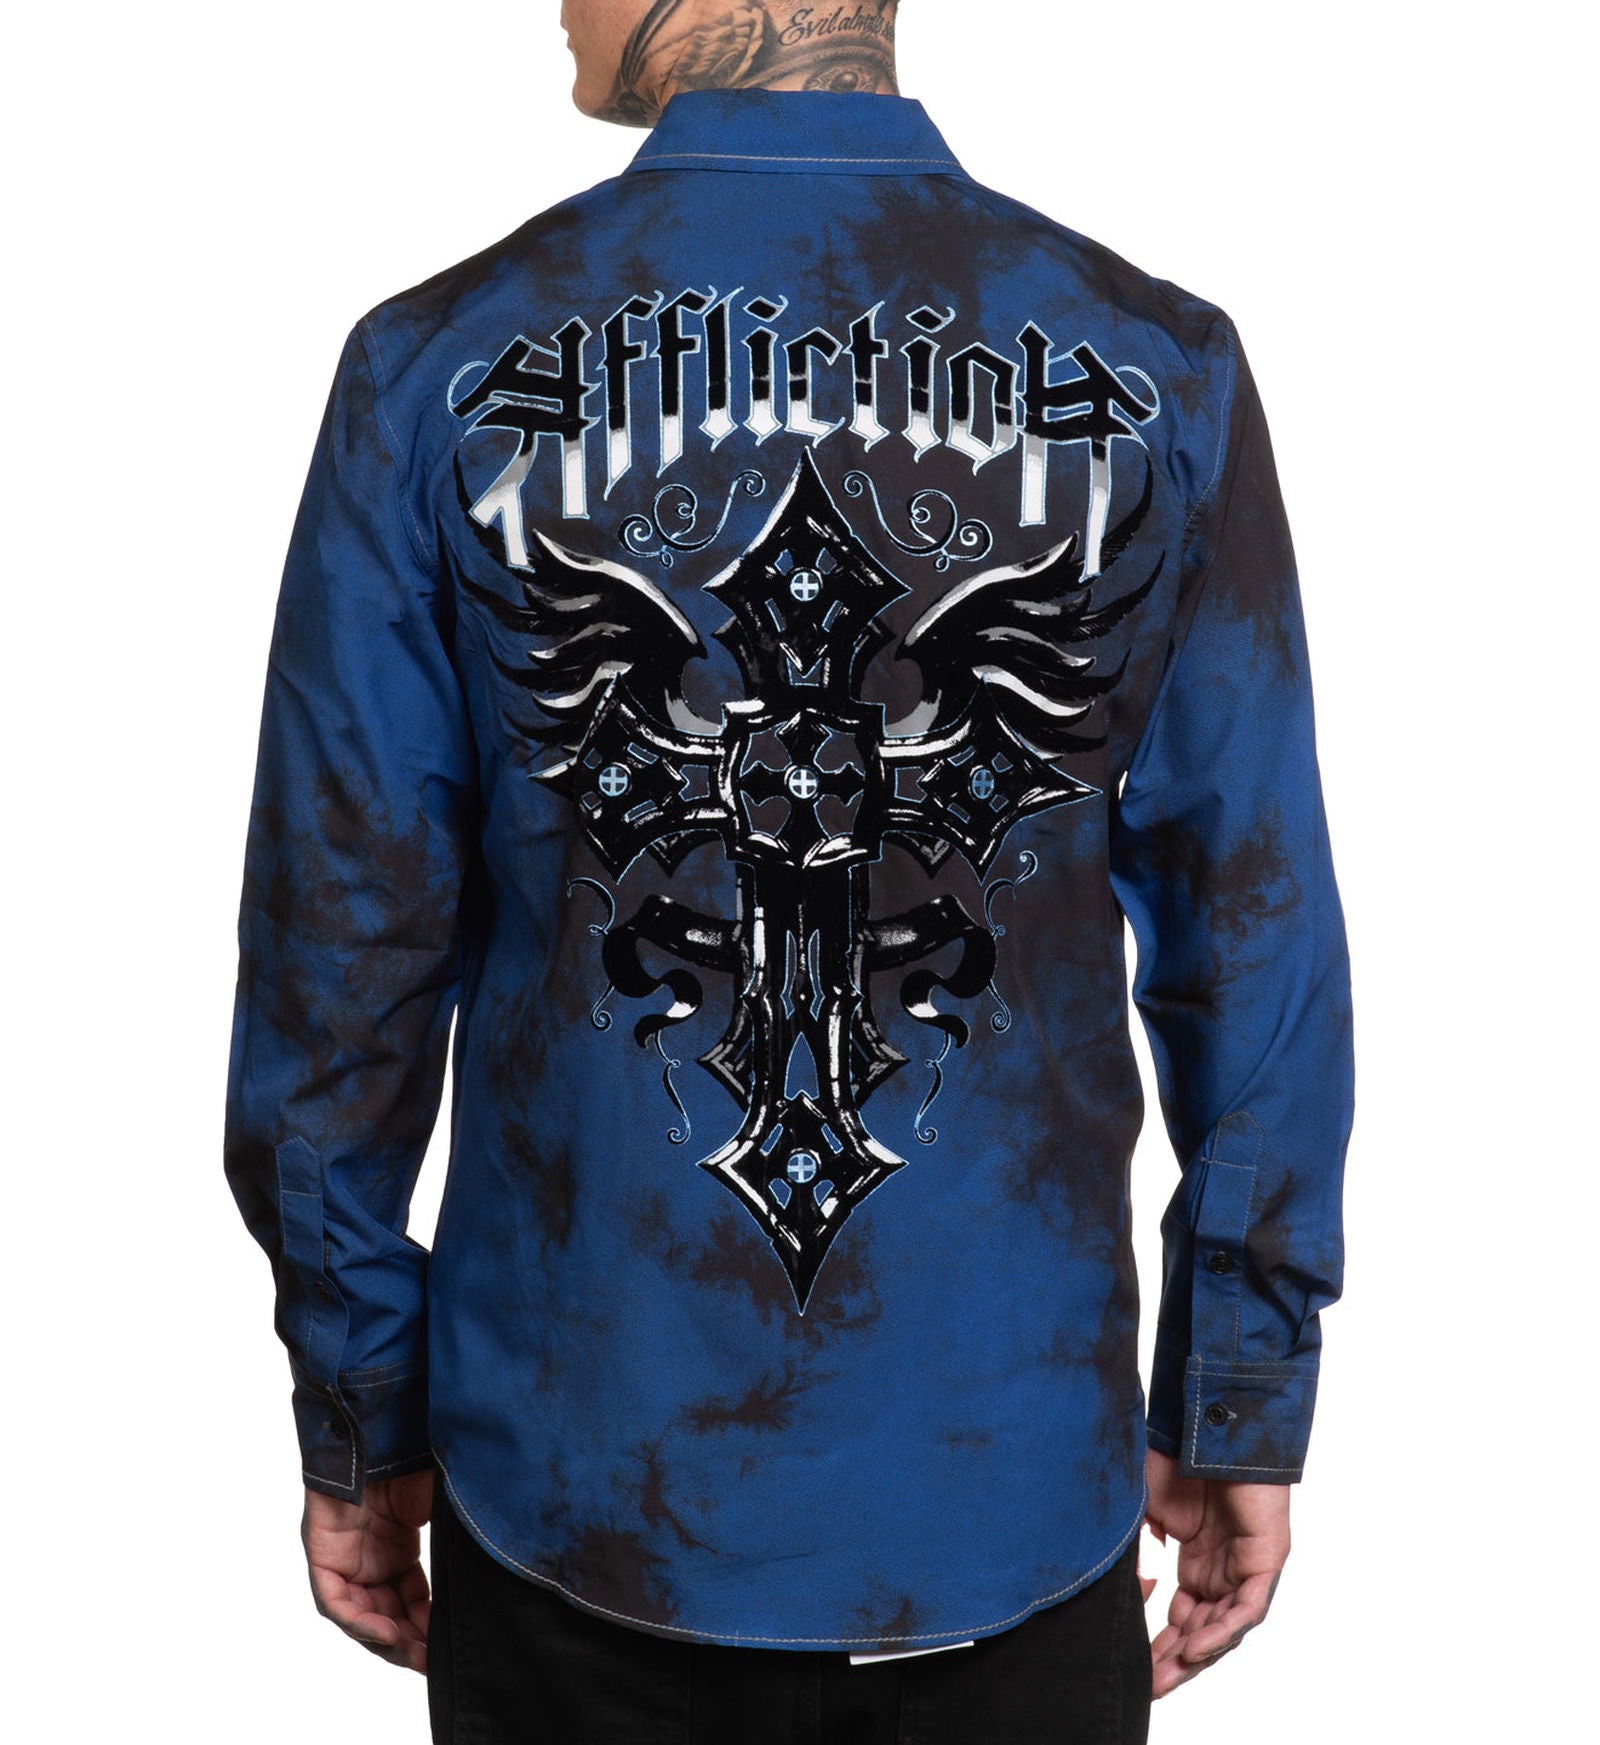 Naples - Affliction Clothing